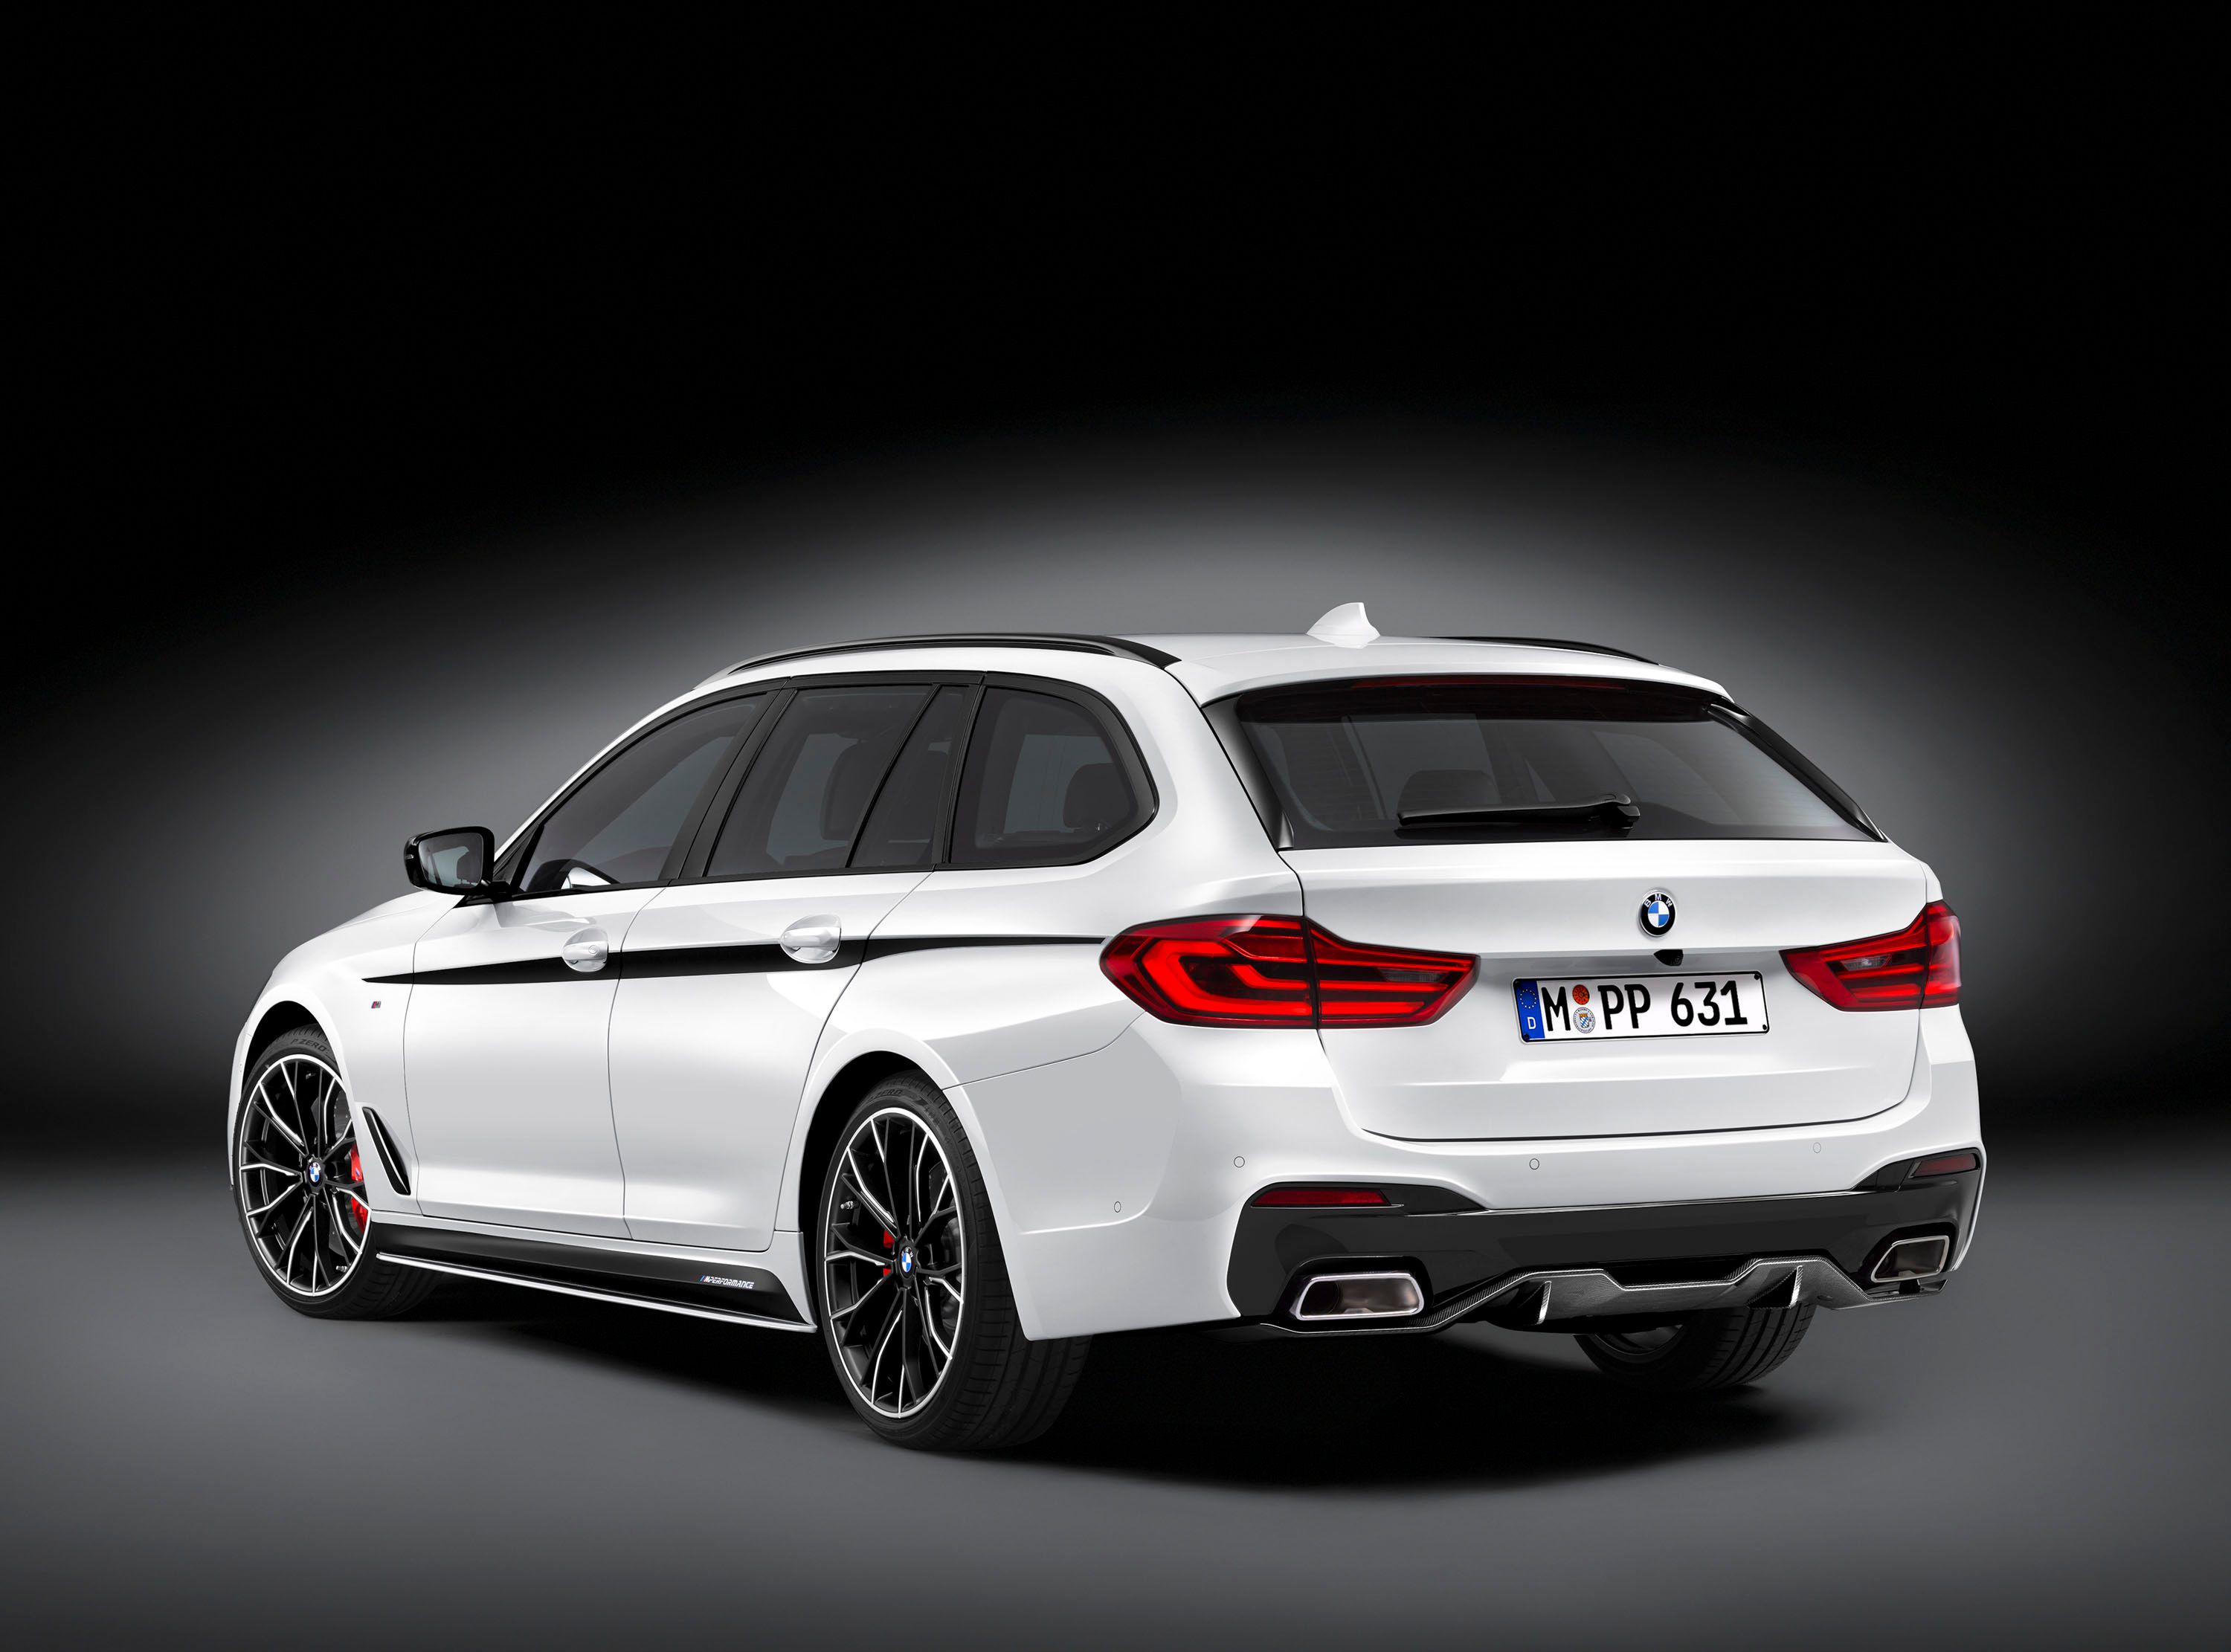 2017 BMW 5 Series Touring with M Performance Parts